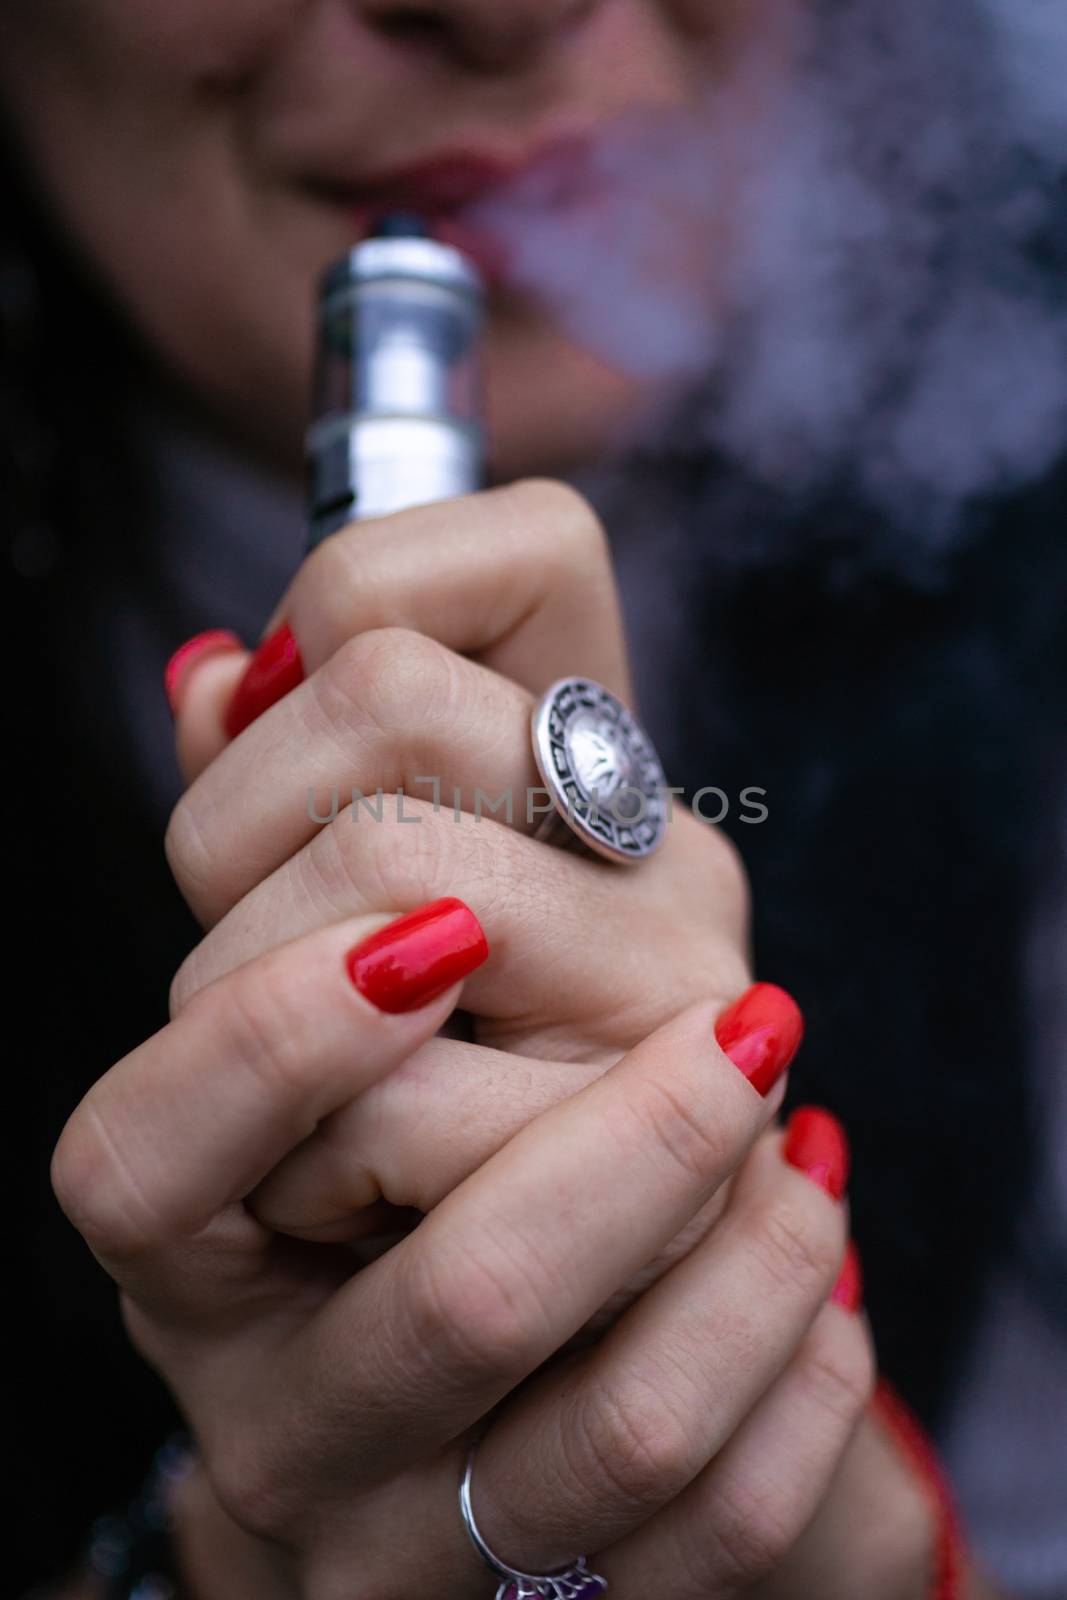 Caucasian woman with red nails manicure and antique ring on finger holds small vape. Smoking alternative vay. Woman exhales thick smoke. Life without cigarettes. Woman-vaper. Small e-cigarette. by alexsdriver